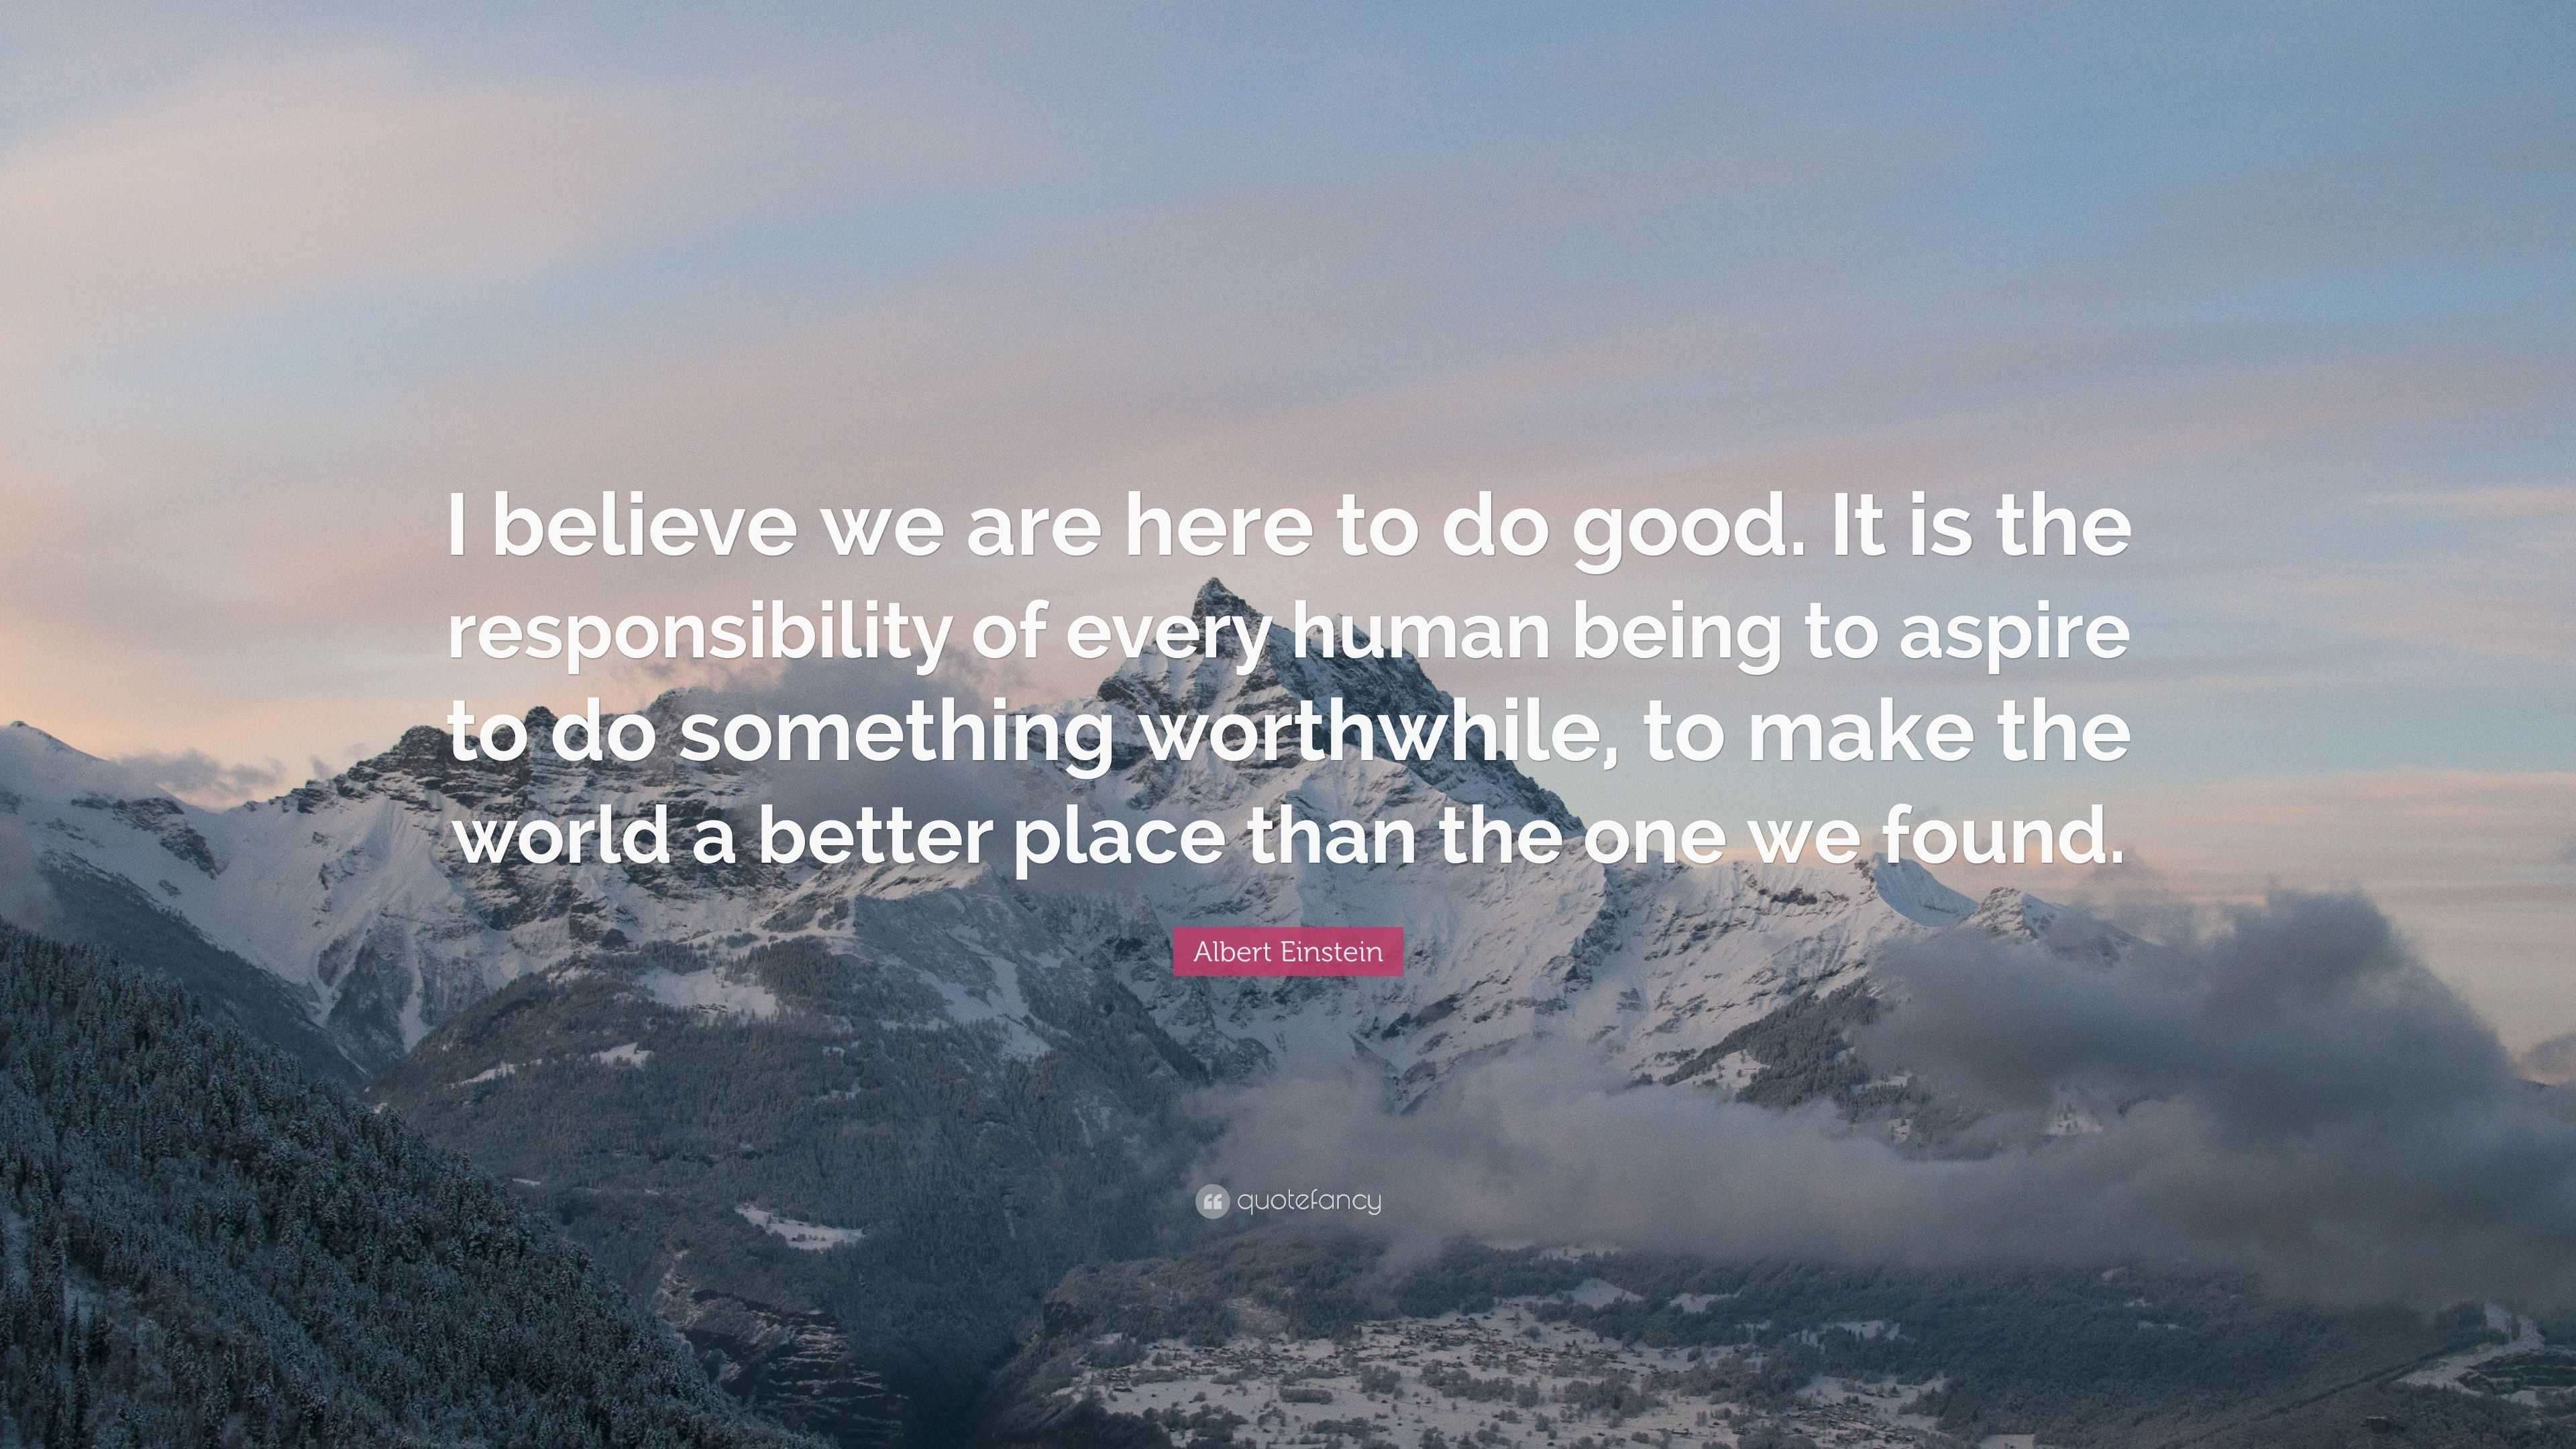 Albert Einstein Quote: “I believe we are here to do good. It is the ...